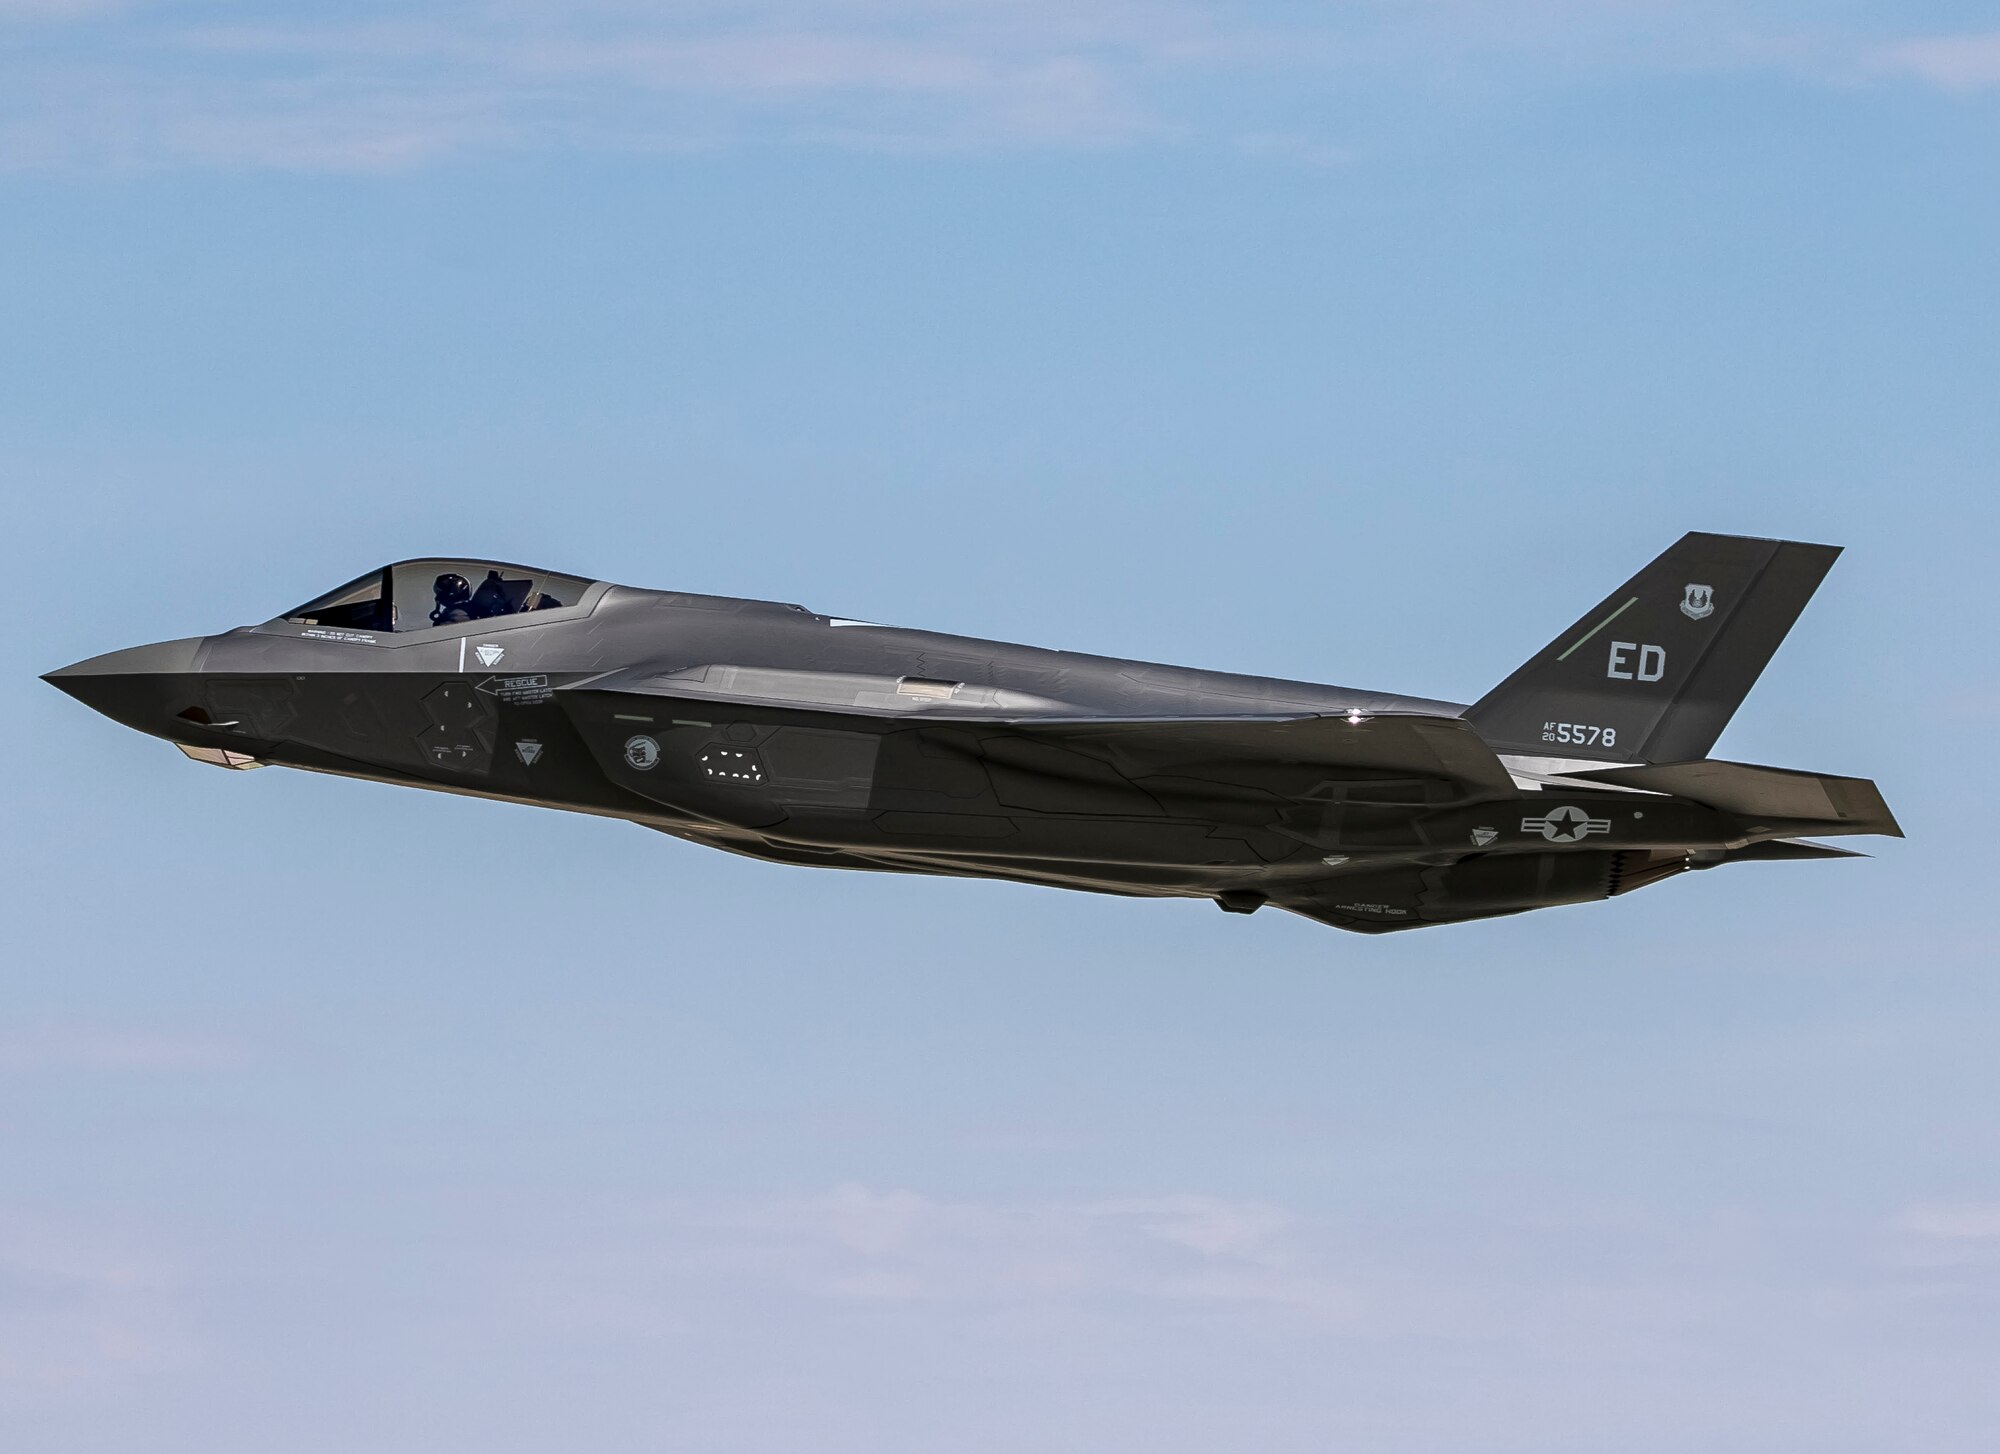 An F-35A Lightning II arrives at Edwards Air Force Base, California, Aug. 1. The aircraft, Air Force serial number 338, is the first of six F-35s the 461st Flight Test Squadron and F-35 Lightning II Integrated Test Force will receive in the next few years. The upgraded fleet will be used to test the Technical Refresh 3 and Block 4 configurations of the Air Force’s newest fighter that will create tactical and operational advantages over peer competitors. (Air Force photo by Chase Kohler)